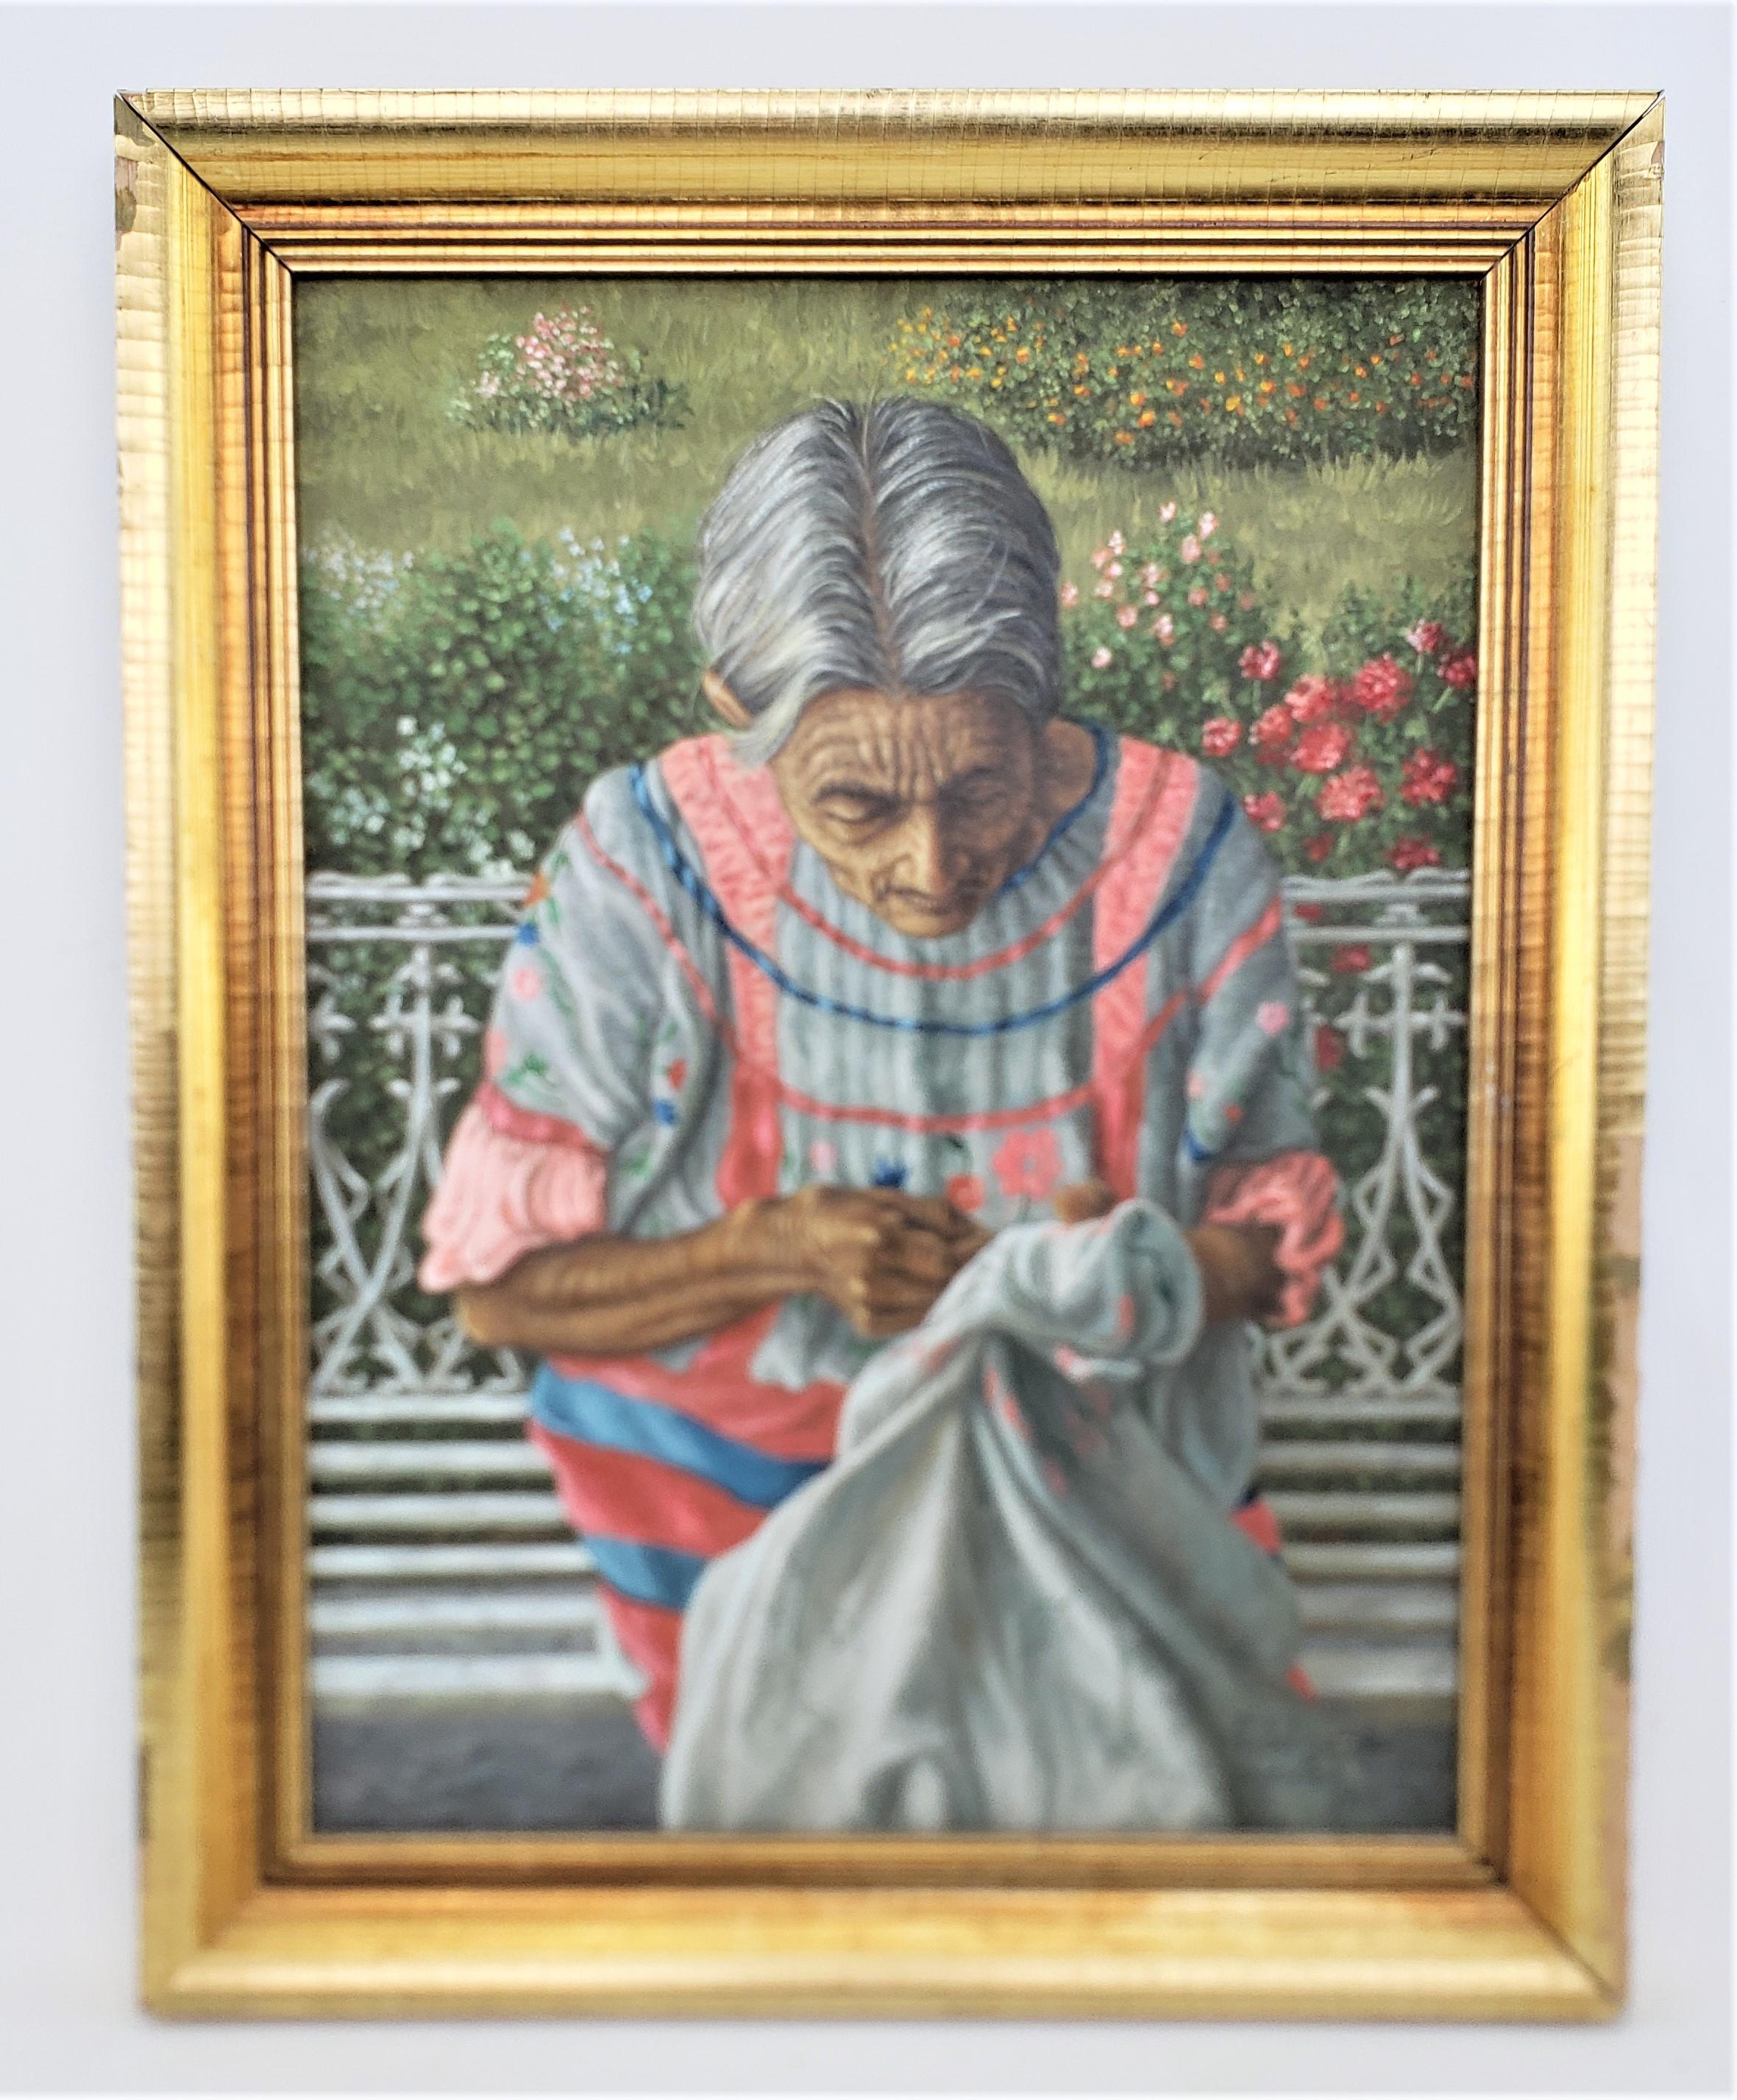 This original painting was done by Fidel Garcia M. of Mexico in 1988 in a realistic style. The painting is done on canvas and depicts an elderly indigenous Mexican woman sewing outdoors on a sunny day while seated on a garden bench. The painting is